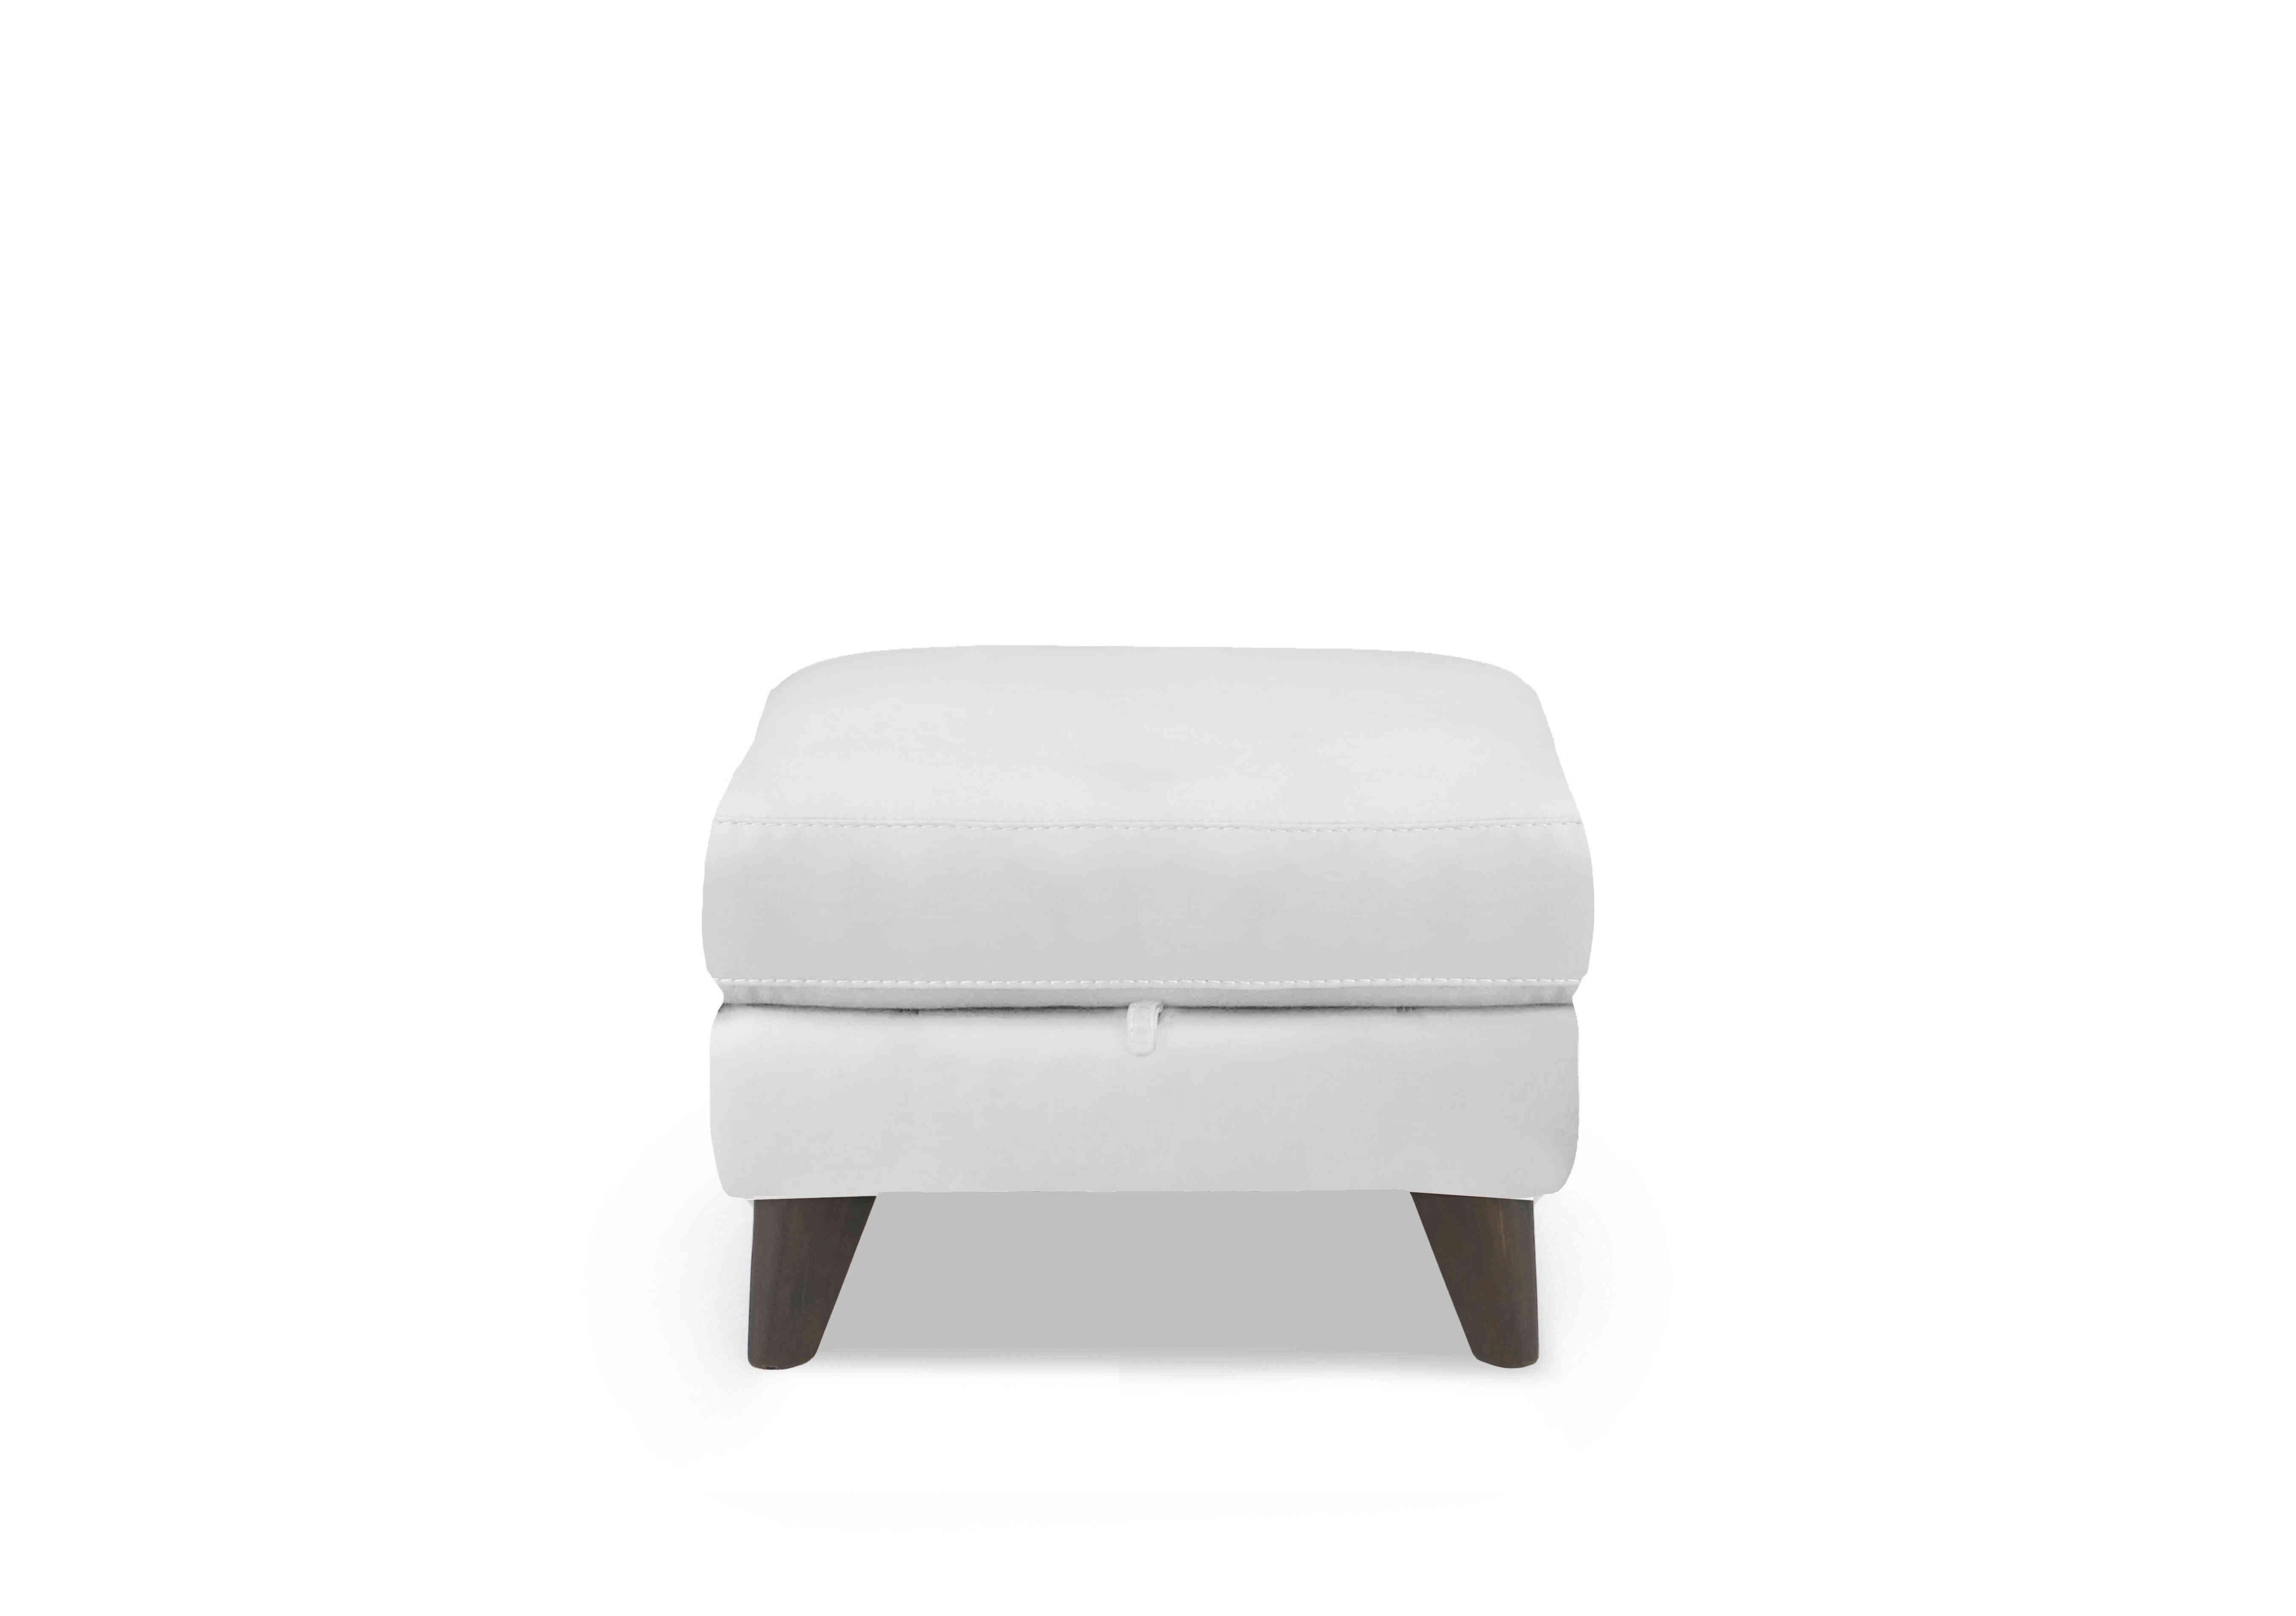 Wade Leather Storage Footstool in Bv-744d Star White on Furniture Village